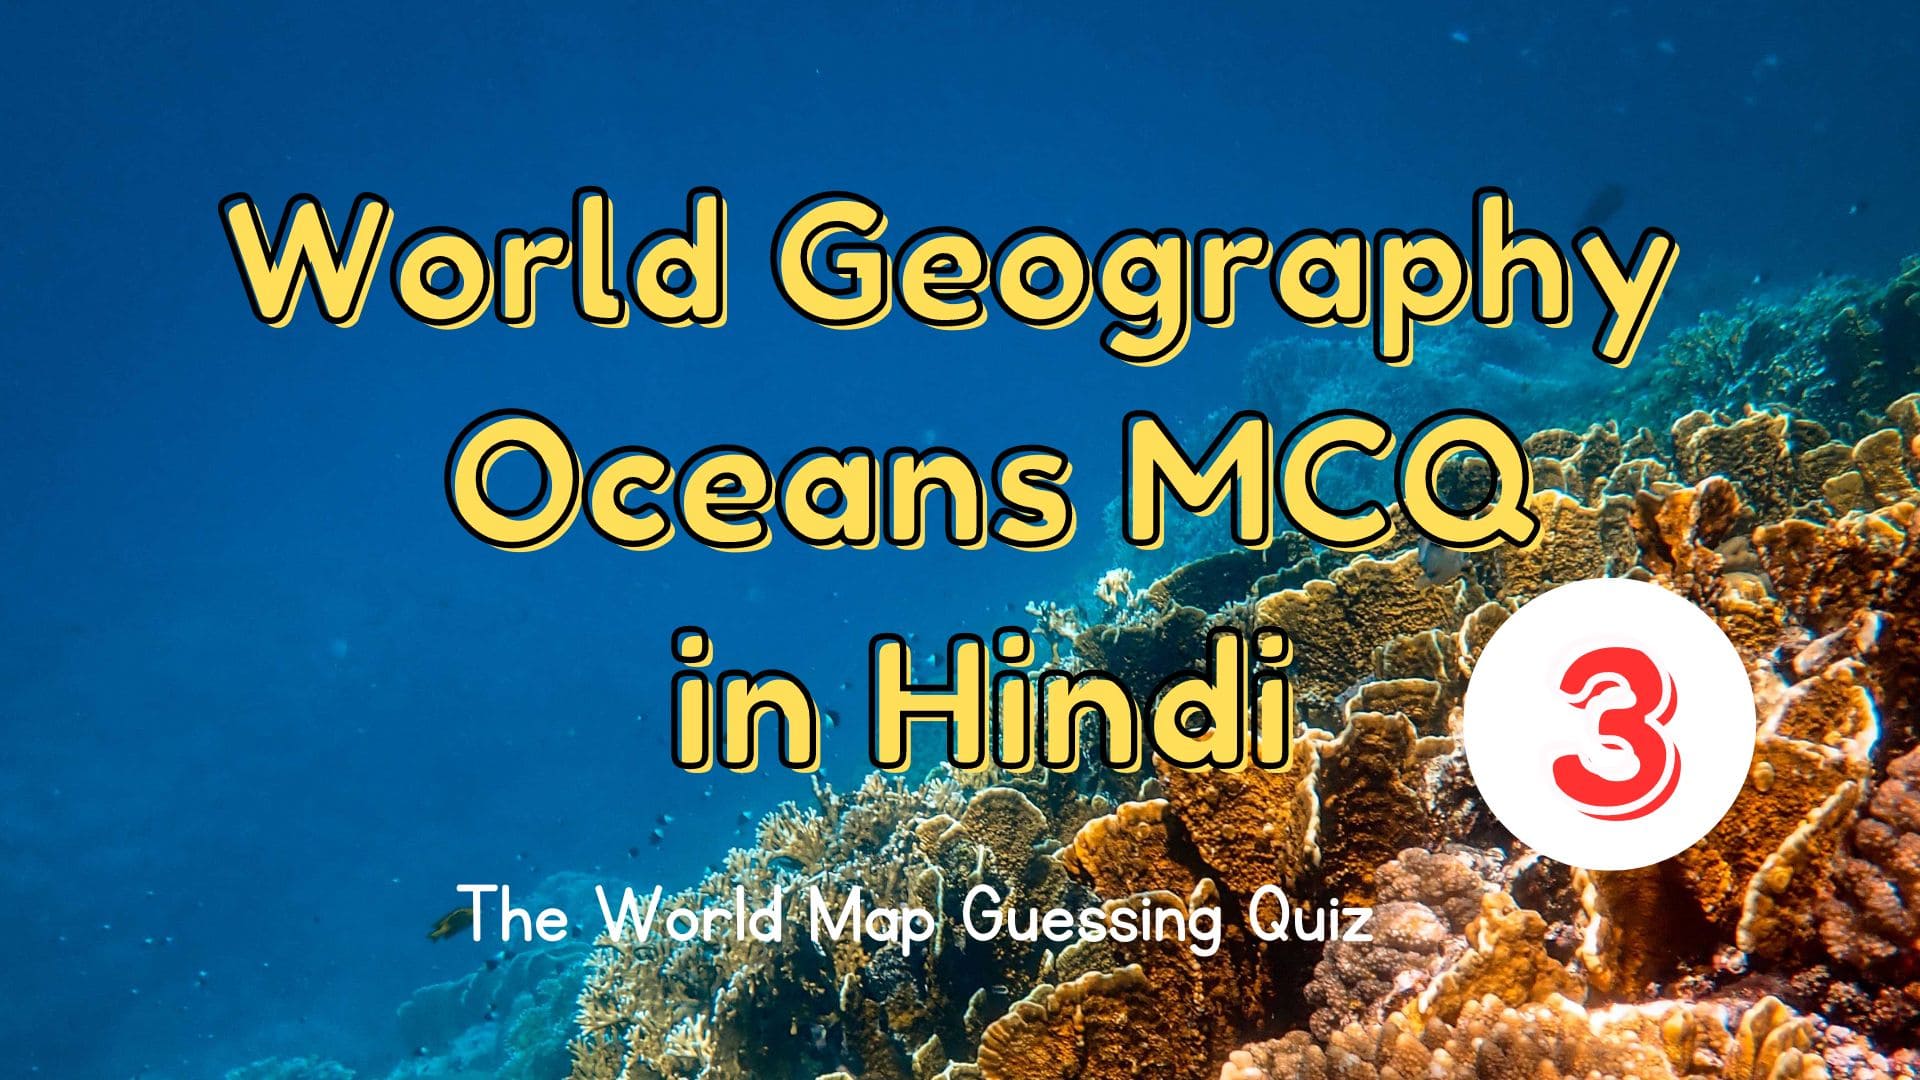 500+ Intresting World Geography Oceans GK MCQ in Hindi -3